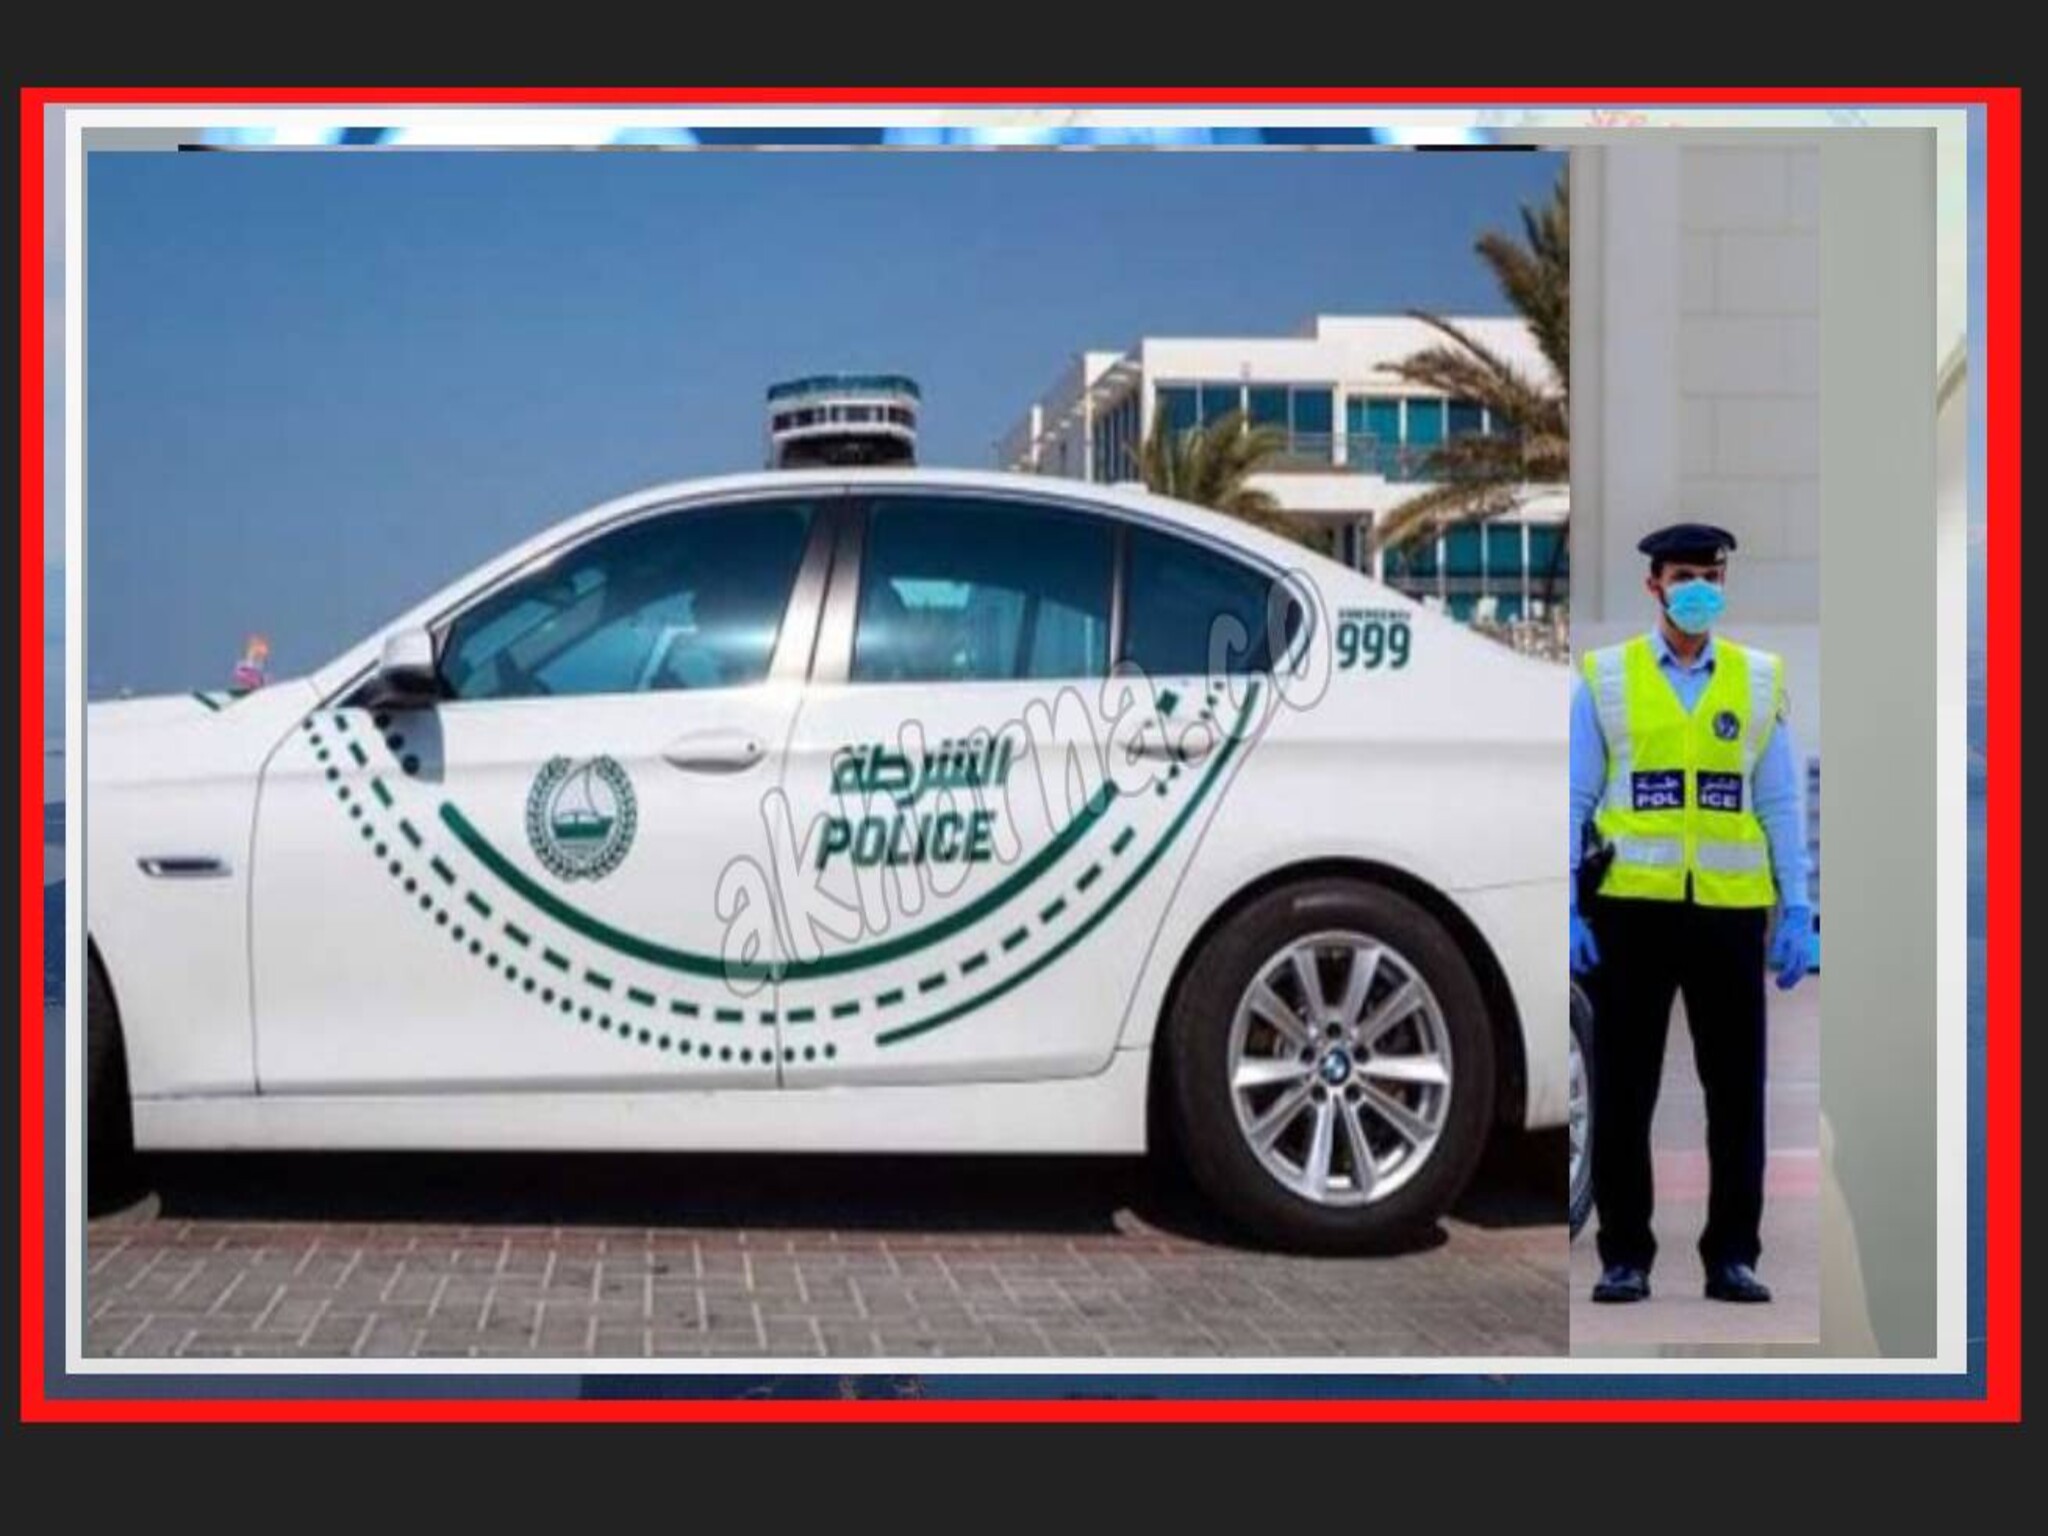 Dubai arrests an expatriate and warns everyone to abide by it